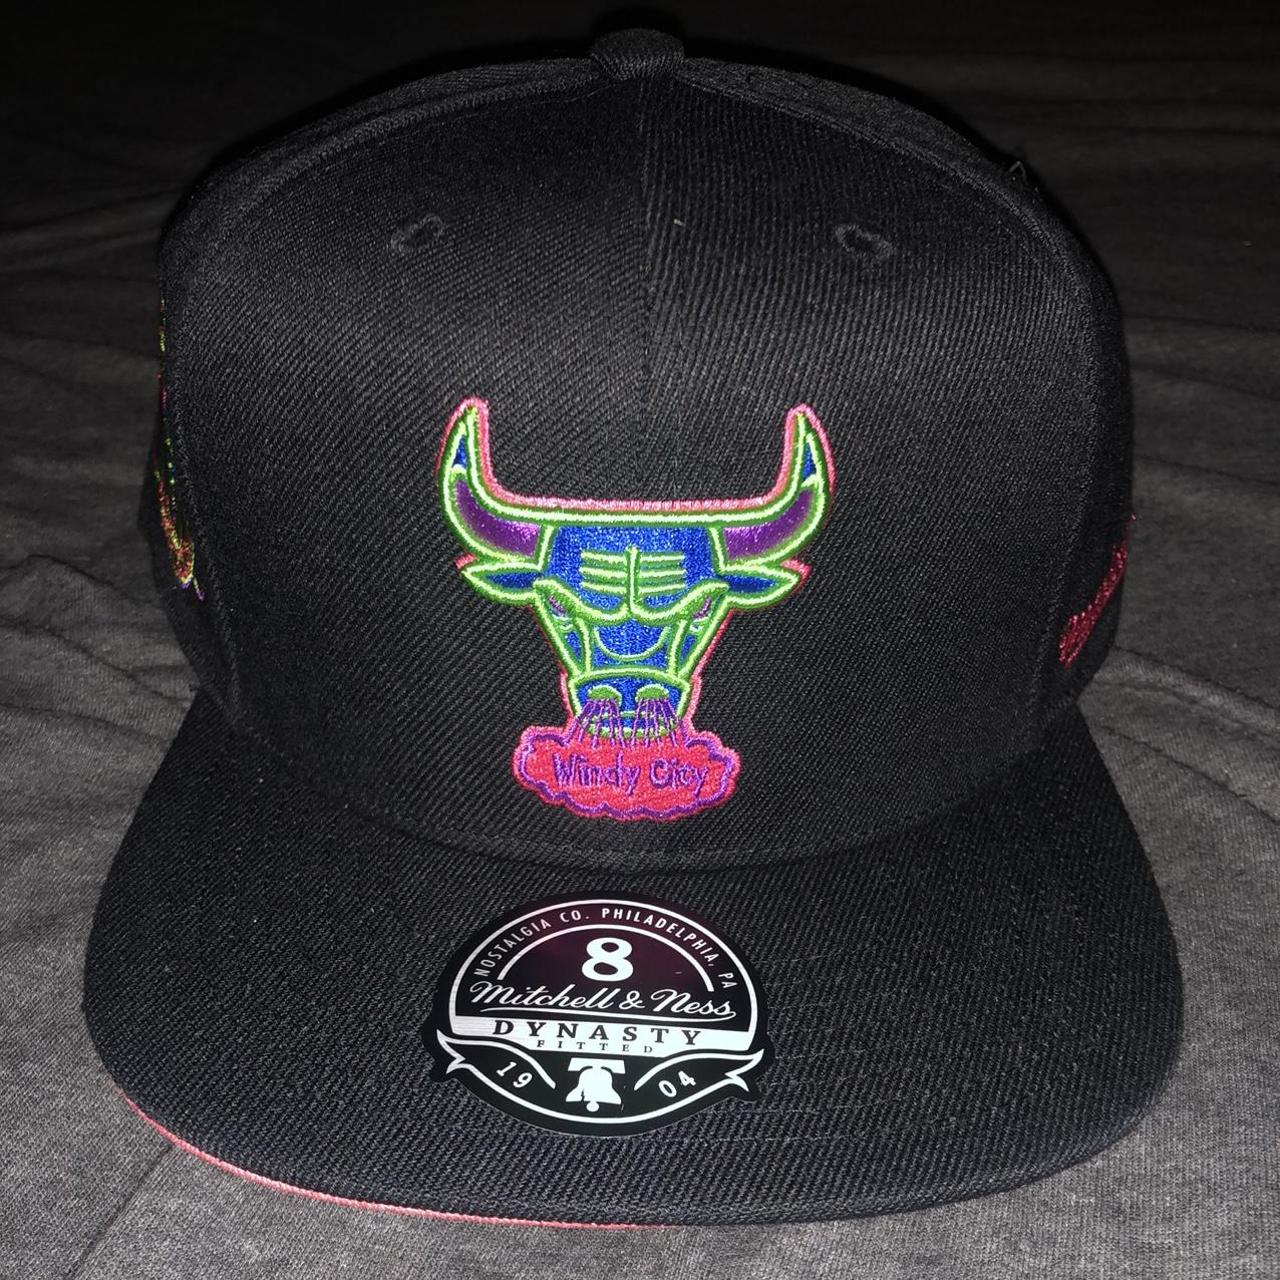 Mitchell & Ness Chicago Bulls Color Bomb Fitted Hat Black